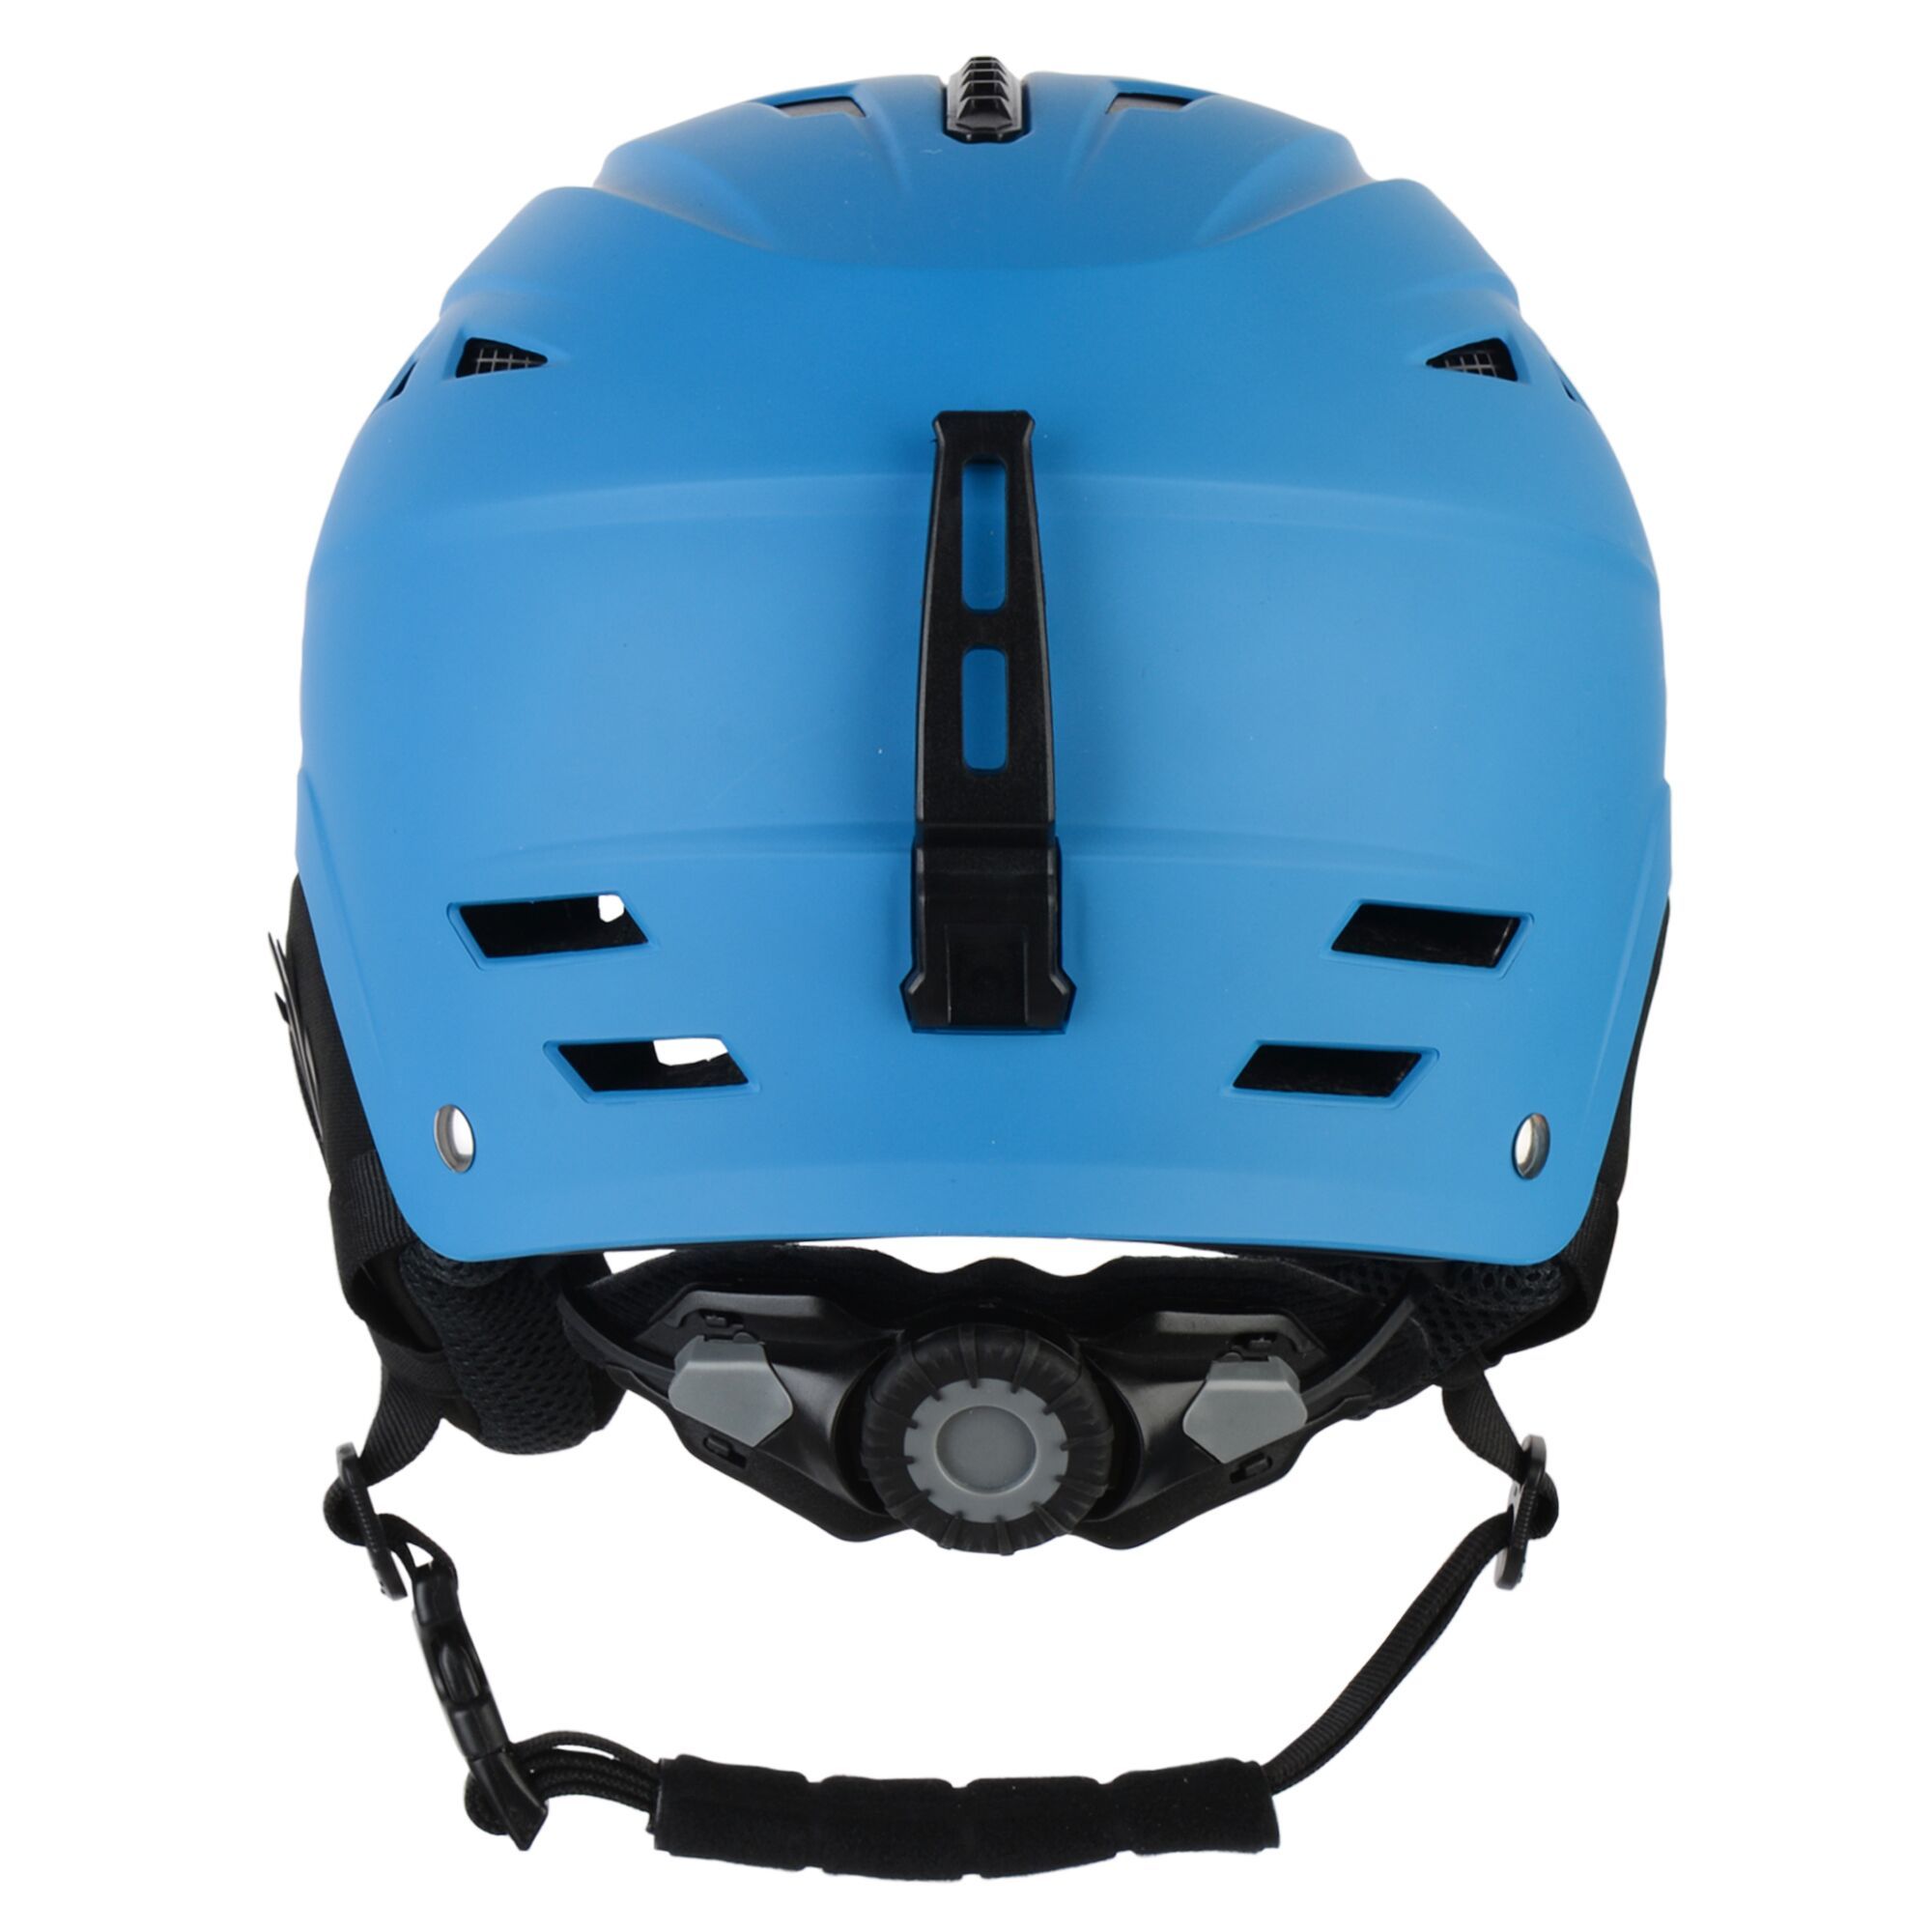 ABS construction with an EPS foam lining ensures excellent impact protection. Low-profile, adjustable air vents for quick and easy temperature regulation. Integral goggle clip for keeping goggles in position whilst on the slope. Size adjustment dial system for easy helmet fitting. Complies to CE EN1077 standards.